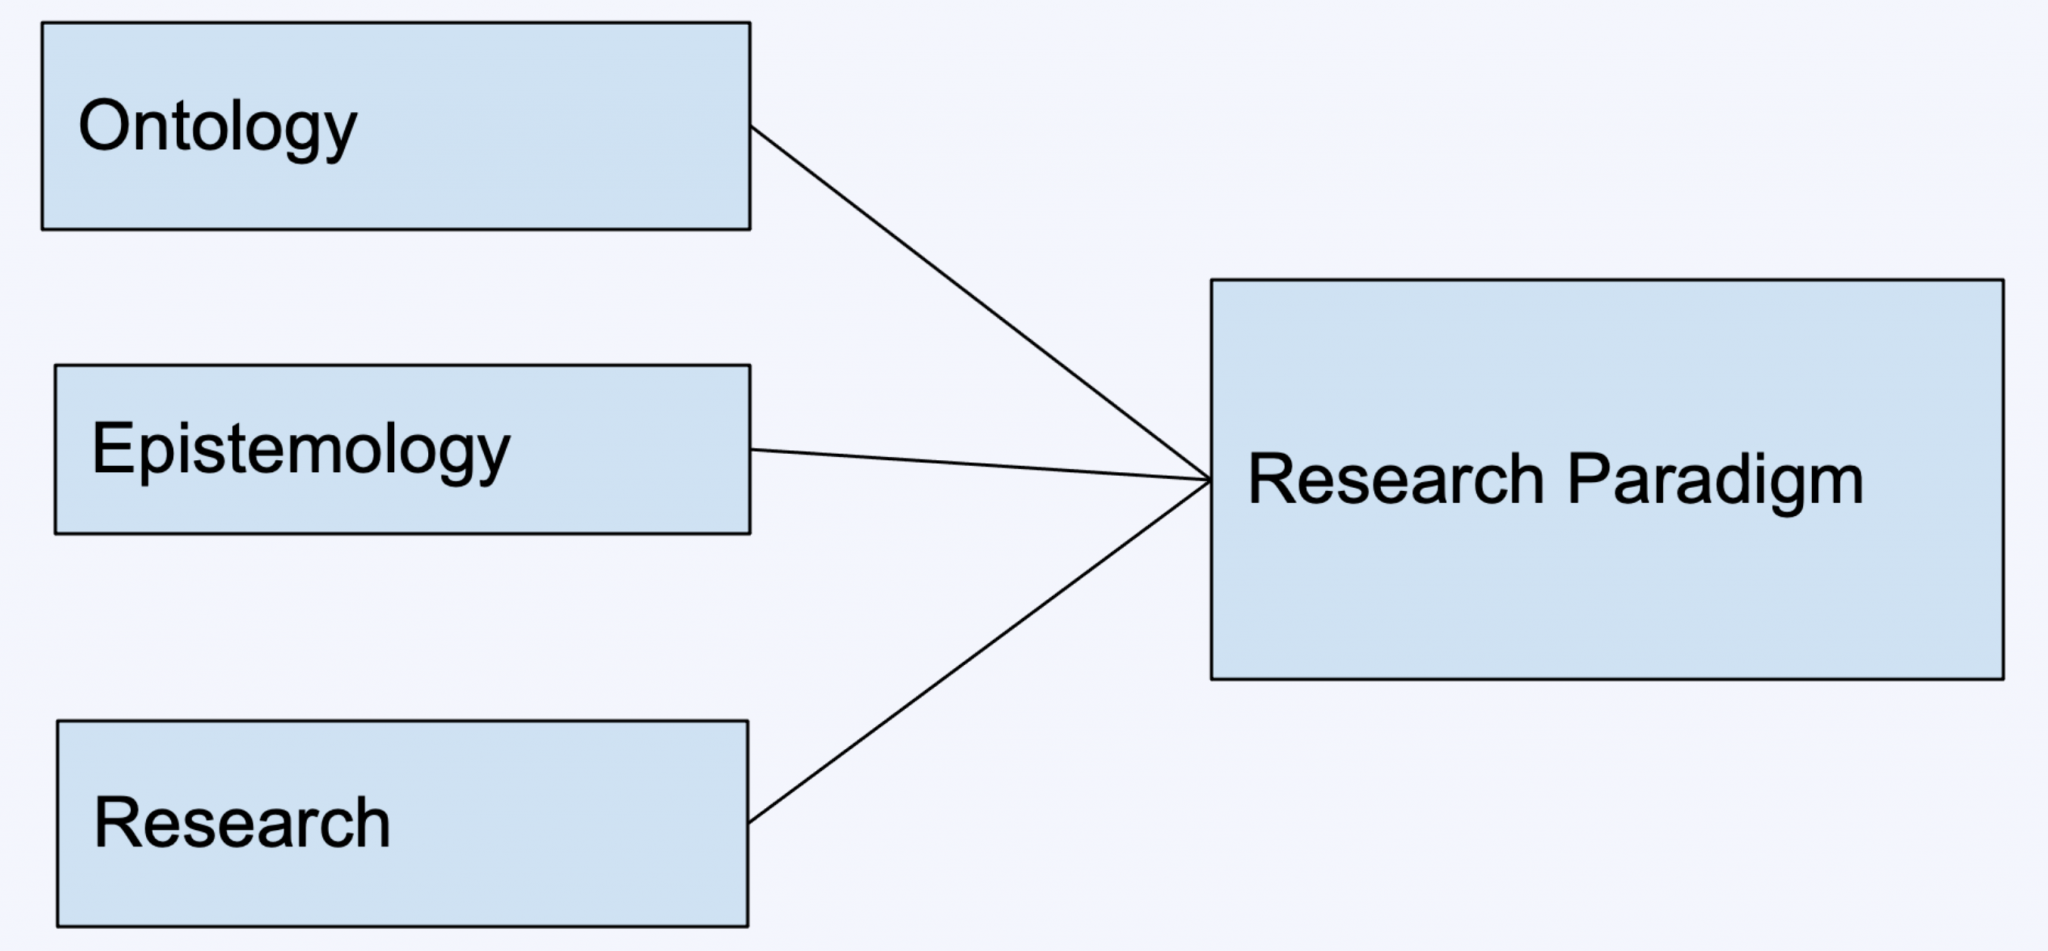 essay about research paradigm